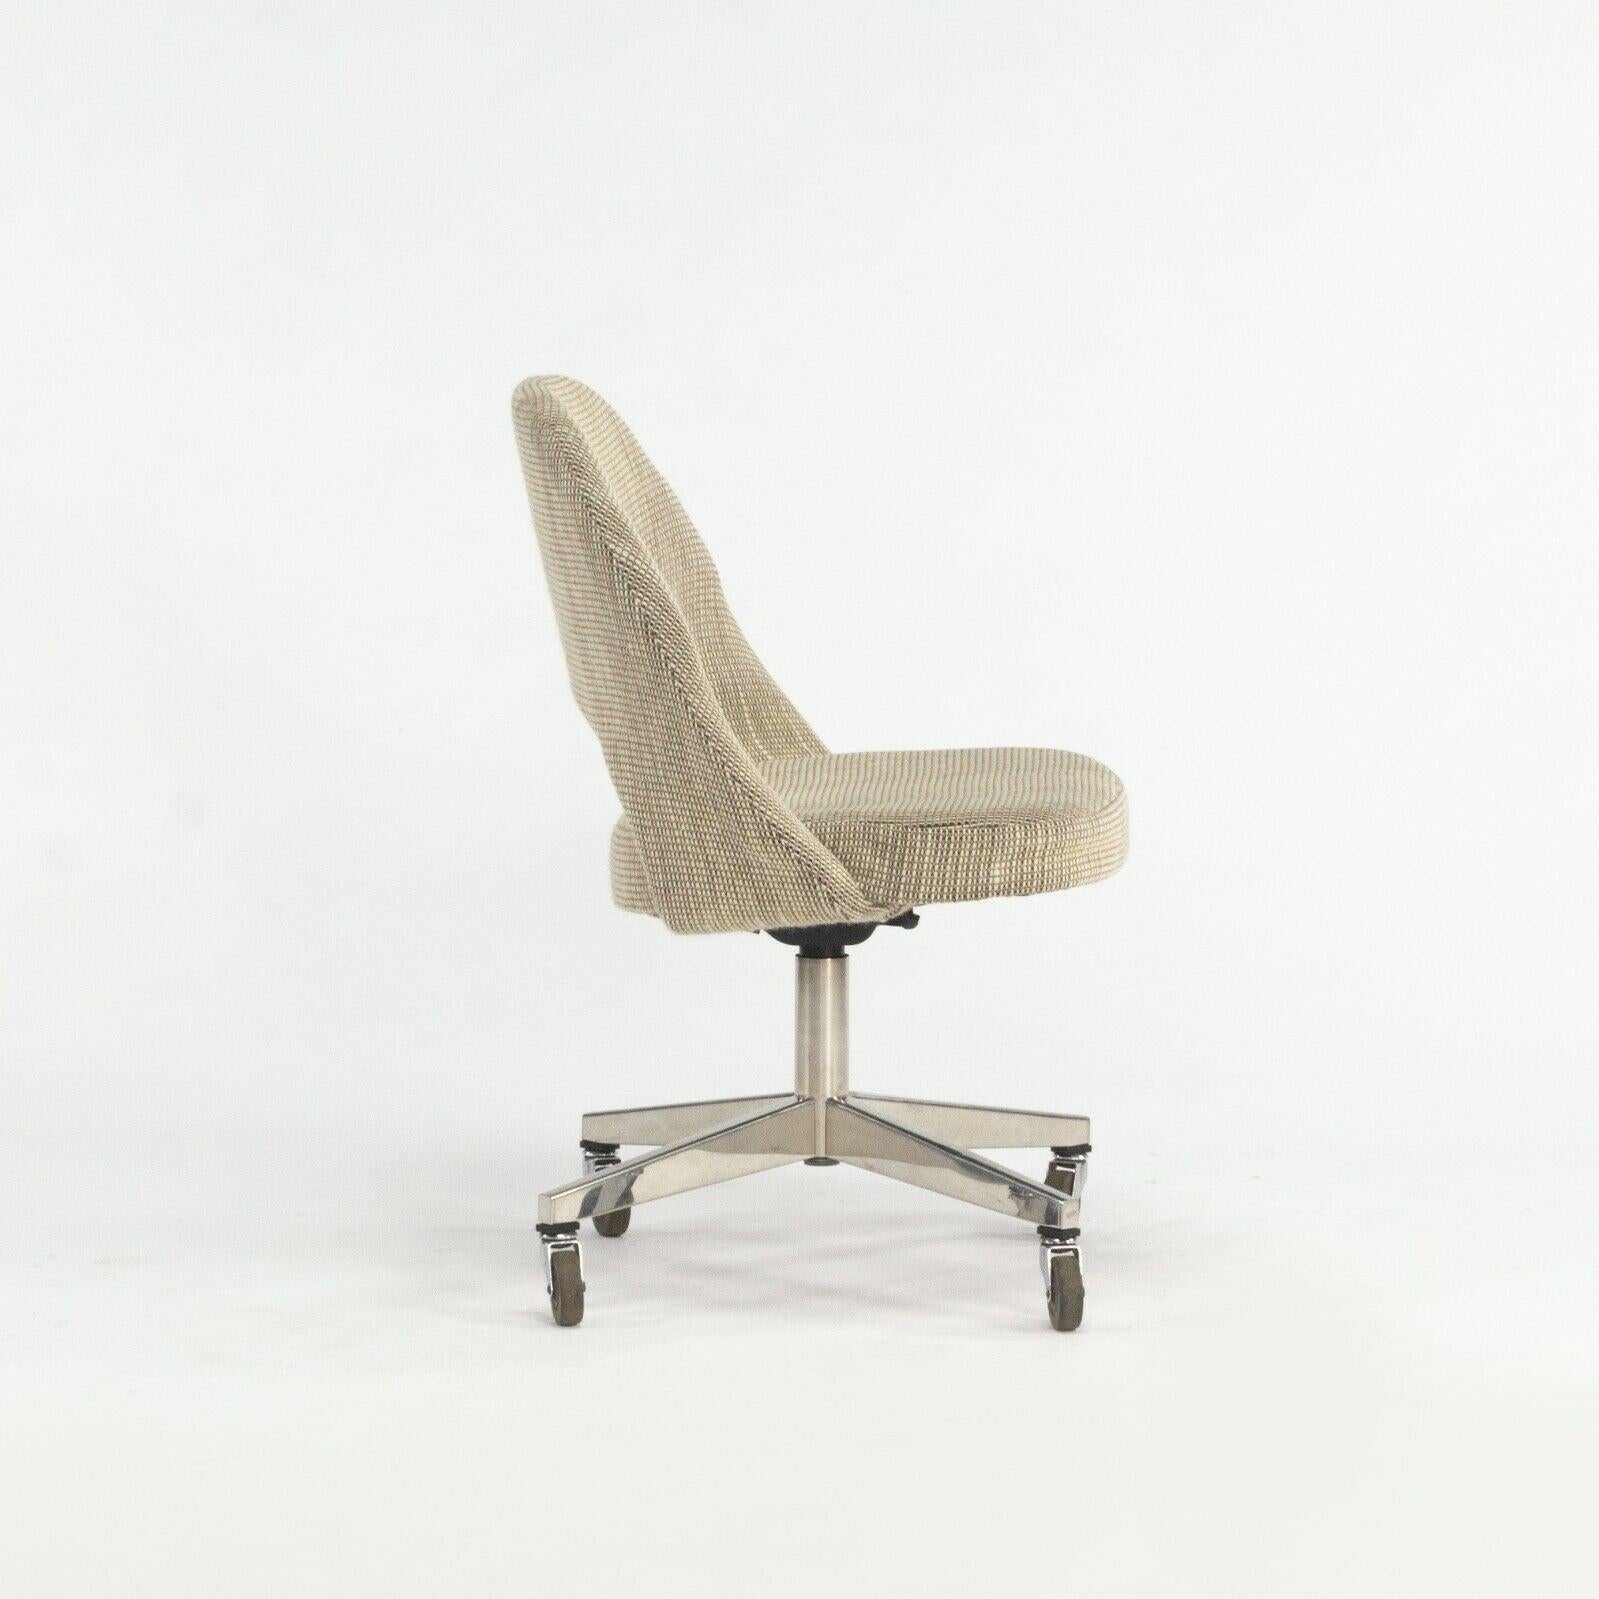 American 1974 Eero Saarinen for Knoll Rolling Executive Office Chairs Original Tan Fabric For Sale